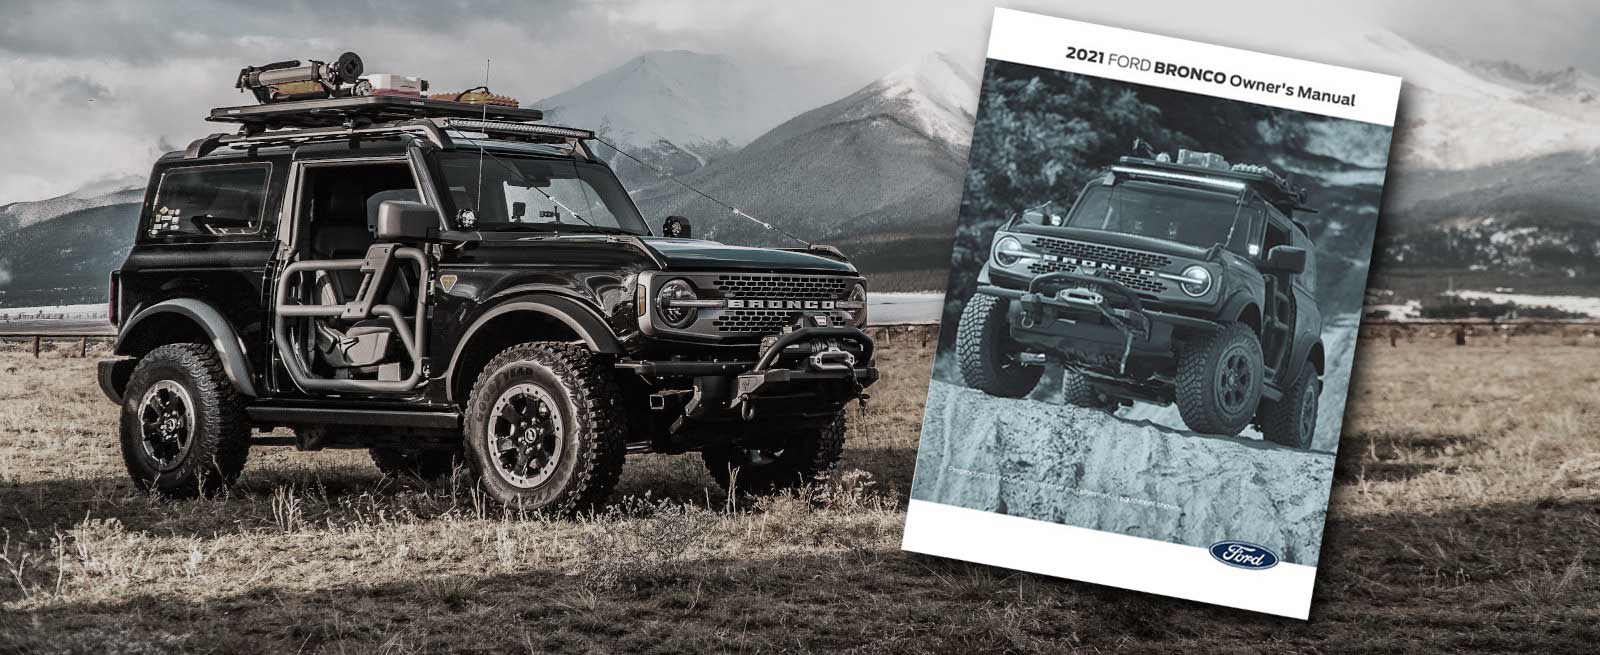 2021 Ford Bronco Owner's Manual Downloadable PDF Bronco Nation